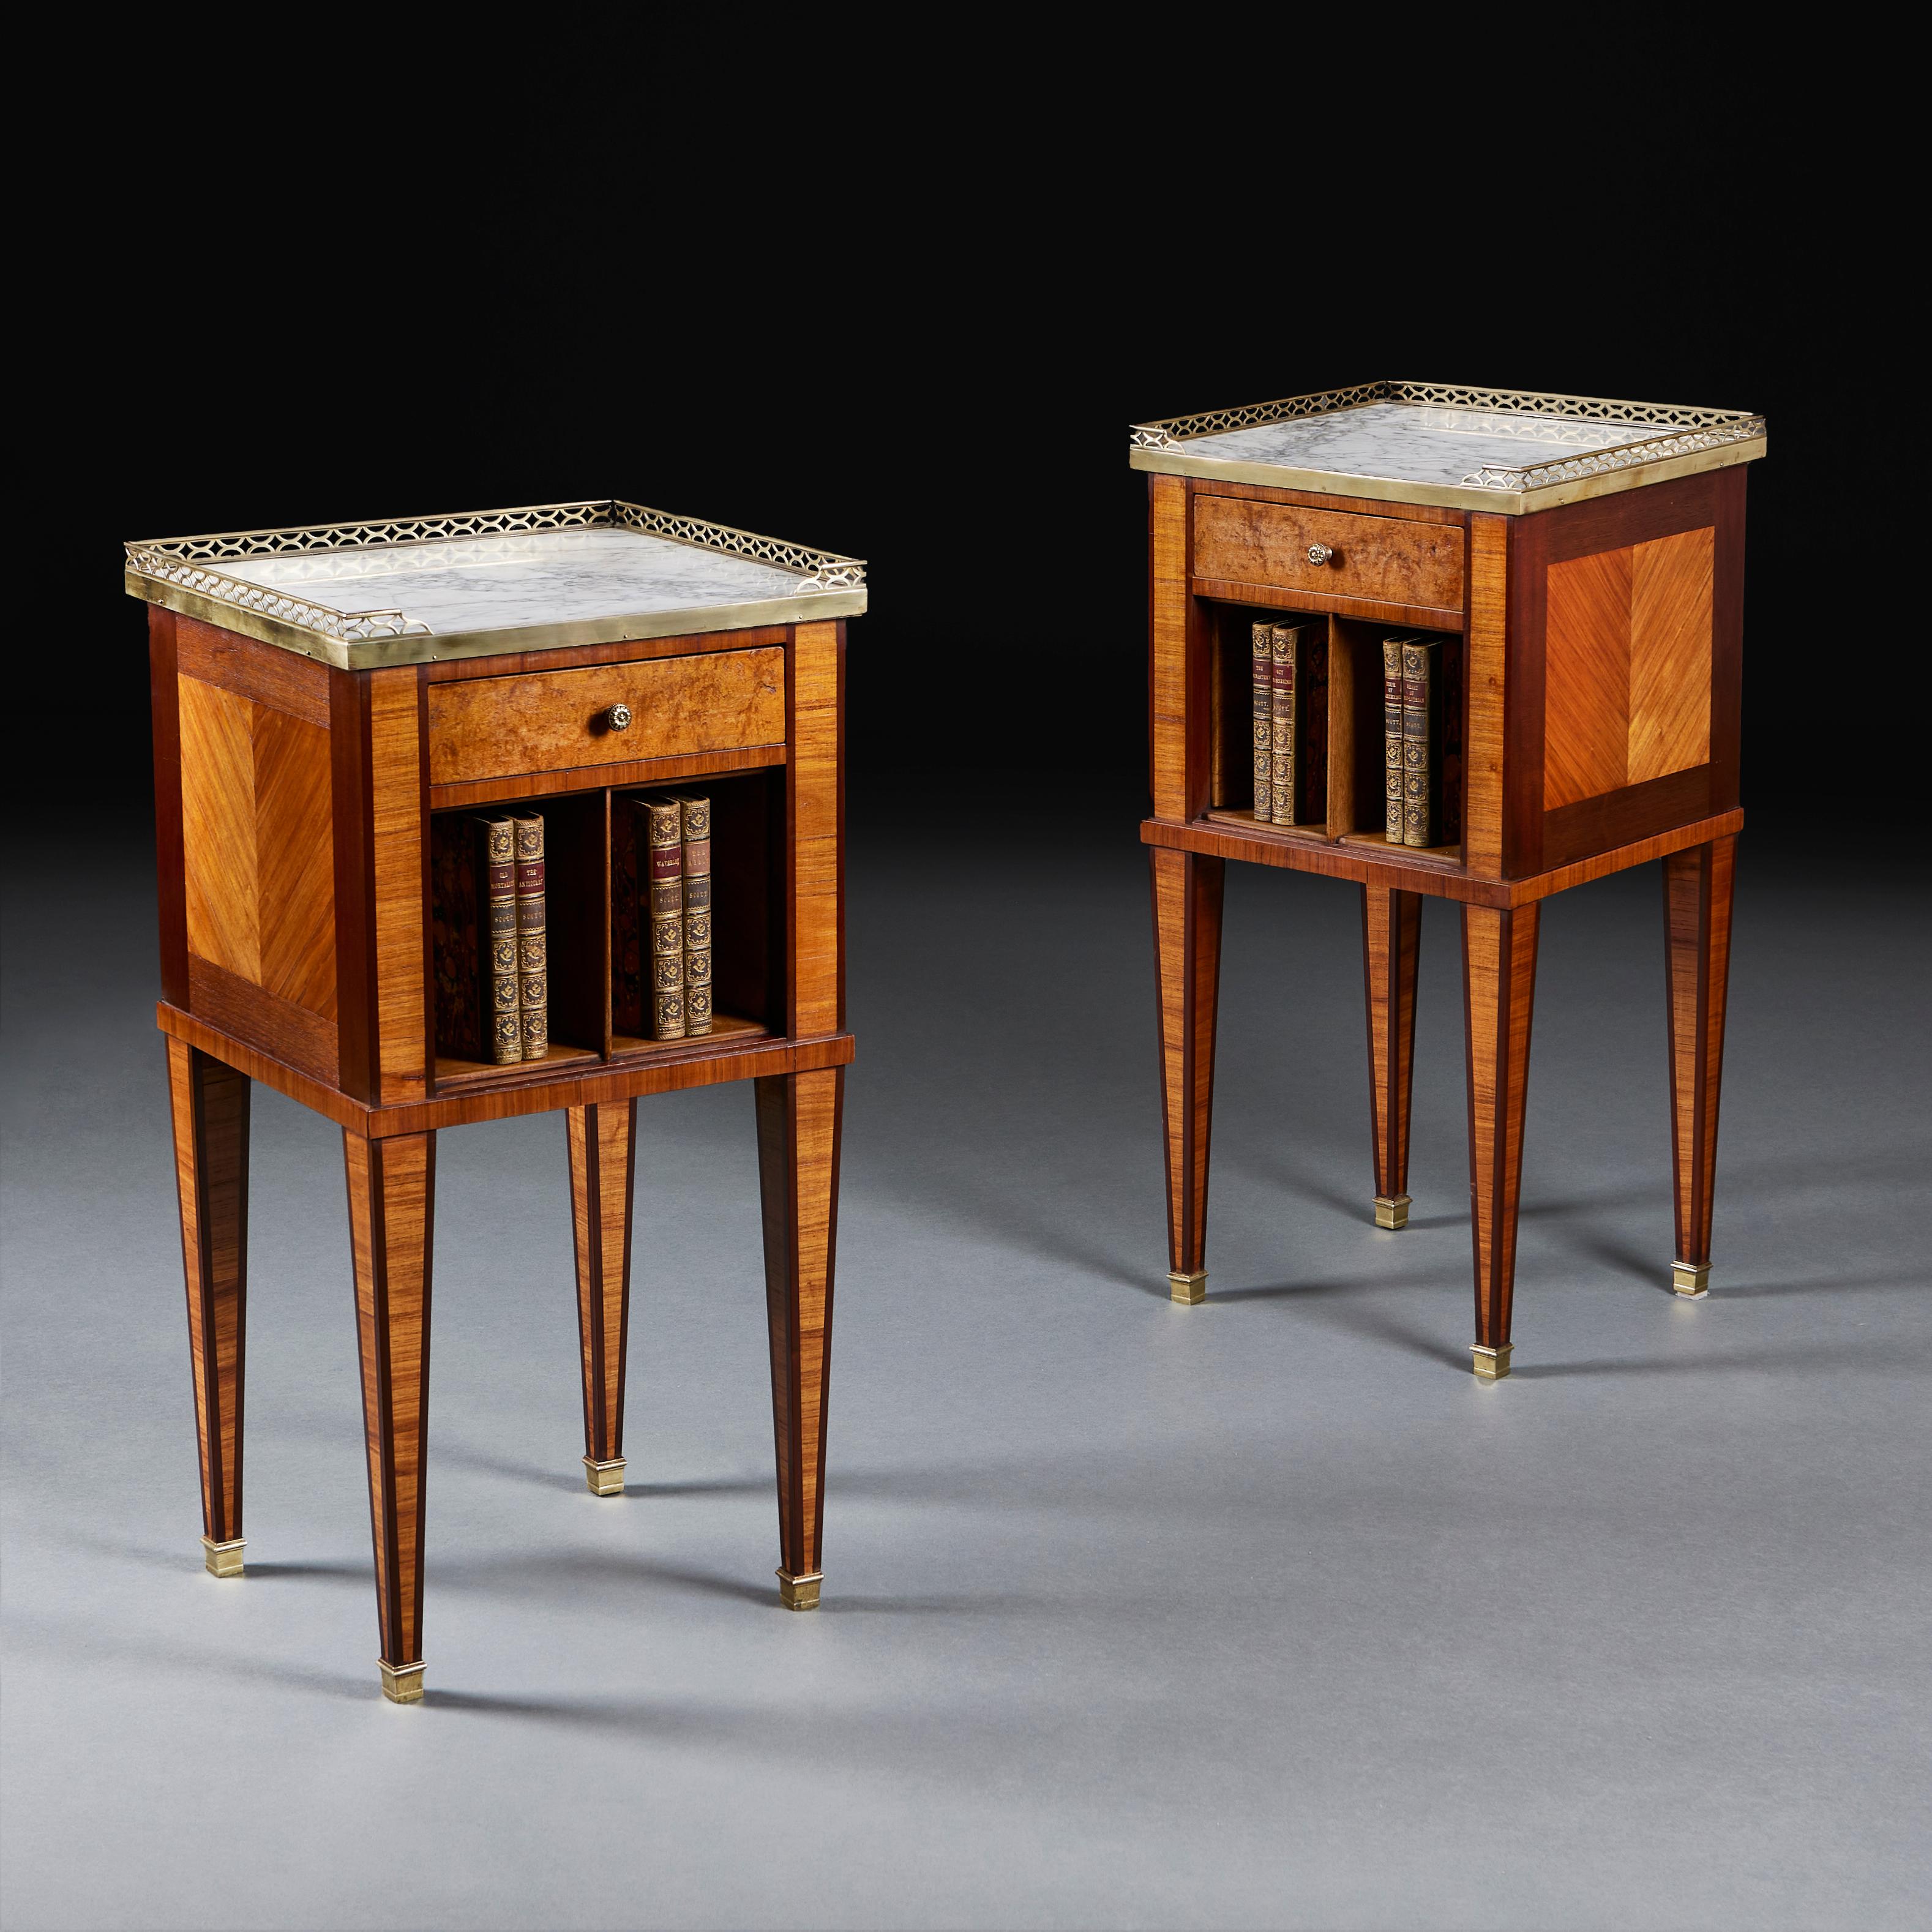 A fine pair of mid nineteenth century kingwood side cabinets, with chevron veneers to the sides, single drawers to the frieze, each with two pigeonholes. The tops with inset white marble, surrounded by pierced brass galleries. 
France, circa